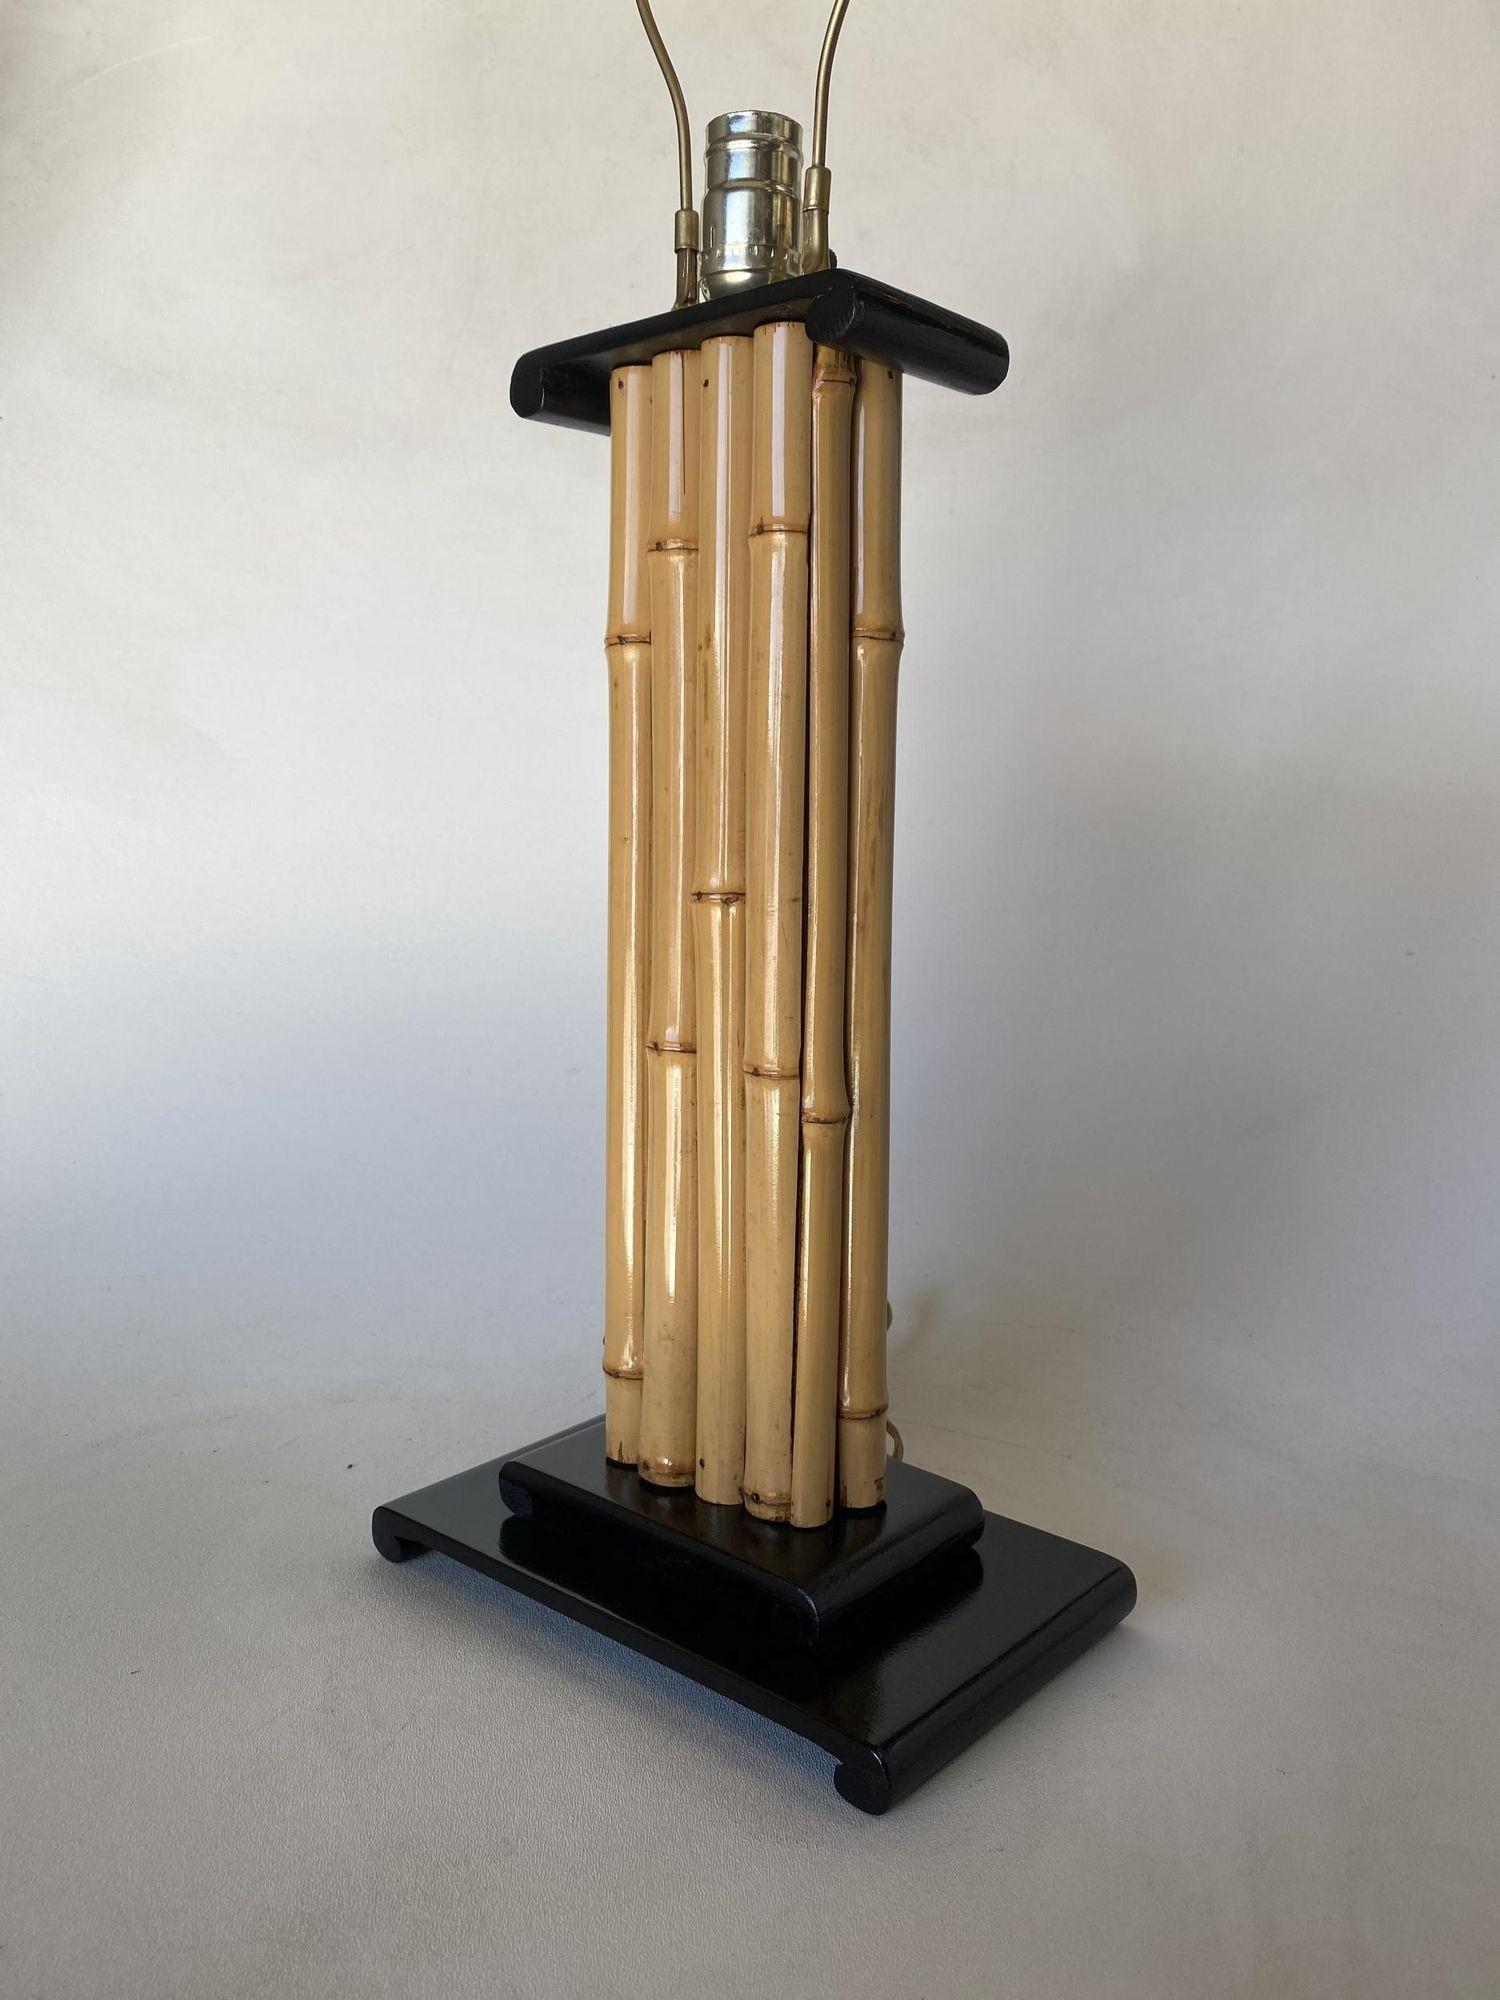 Wrapped Rattan Pole Lamp W/ Black Demi Base In Excellent Condition For Sale In Van Nuys, CA